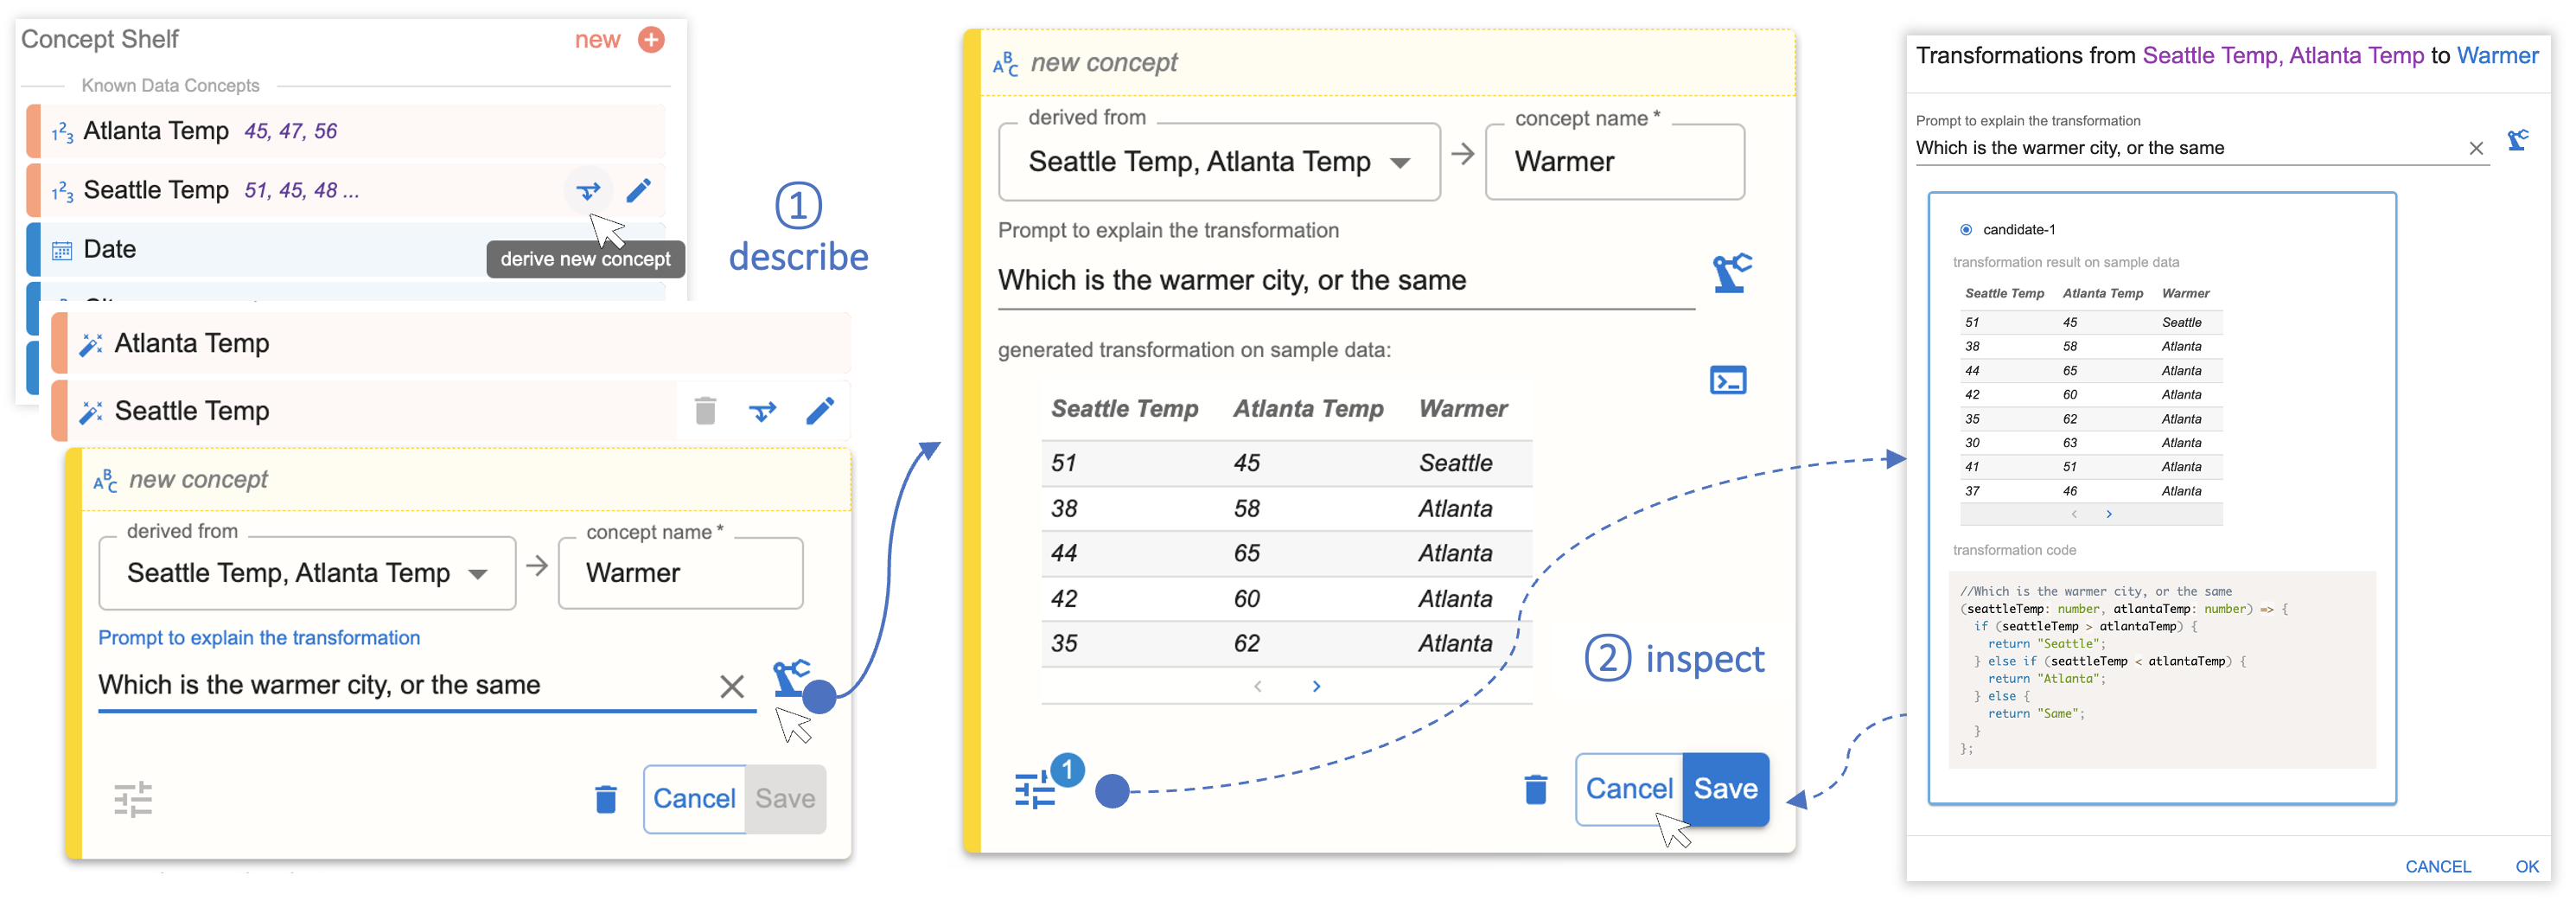 The figure shows the workflow of the analyst to create new data concepts “Warmer” using natural language query. The left figure shows that the user opens a panel in Data Formulator’s concept shelf. The user selected “derived from” two concepts “Seattle Temp” and “Atlanta Temp” and typed the concept name “Warmer”. The user also provides a natural language query “Which is the warmer city, or the same” to describe the concept. After clicking a “forge” icon, in the second box shows the concept with the instantiated concept which contains an example table: the example table has 5 rows and header “Seattle Temp, Atlanta Temp, Warmer”, and the rows show “51, 45, Seattle”, “38, 58, Atlanta”, “44, 65, Atlanta”, “42, 60, Atlanta”, “35, 62, Atlanta”. The user then clicks the inspect button, and Data Formulator opens a panel that shows the code that achieve the transformation. Finally, the analyst clicks “save” button after inspecting the code to confirm the code is correct. 